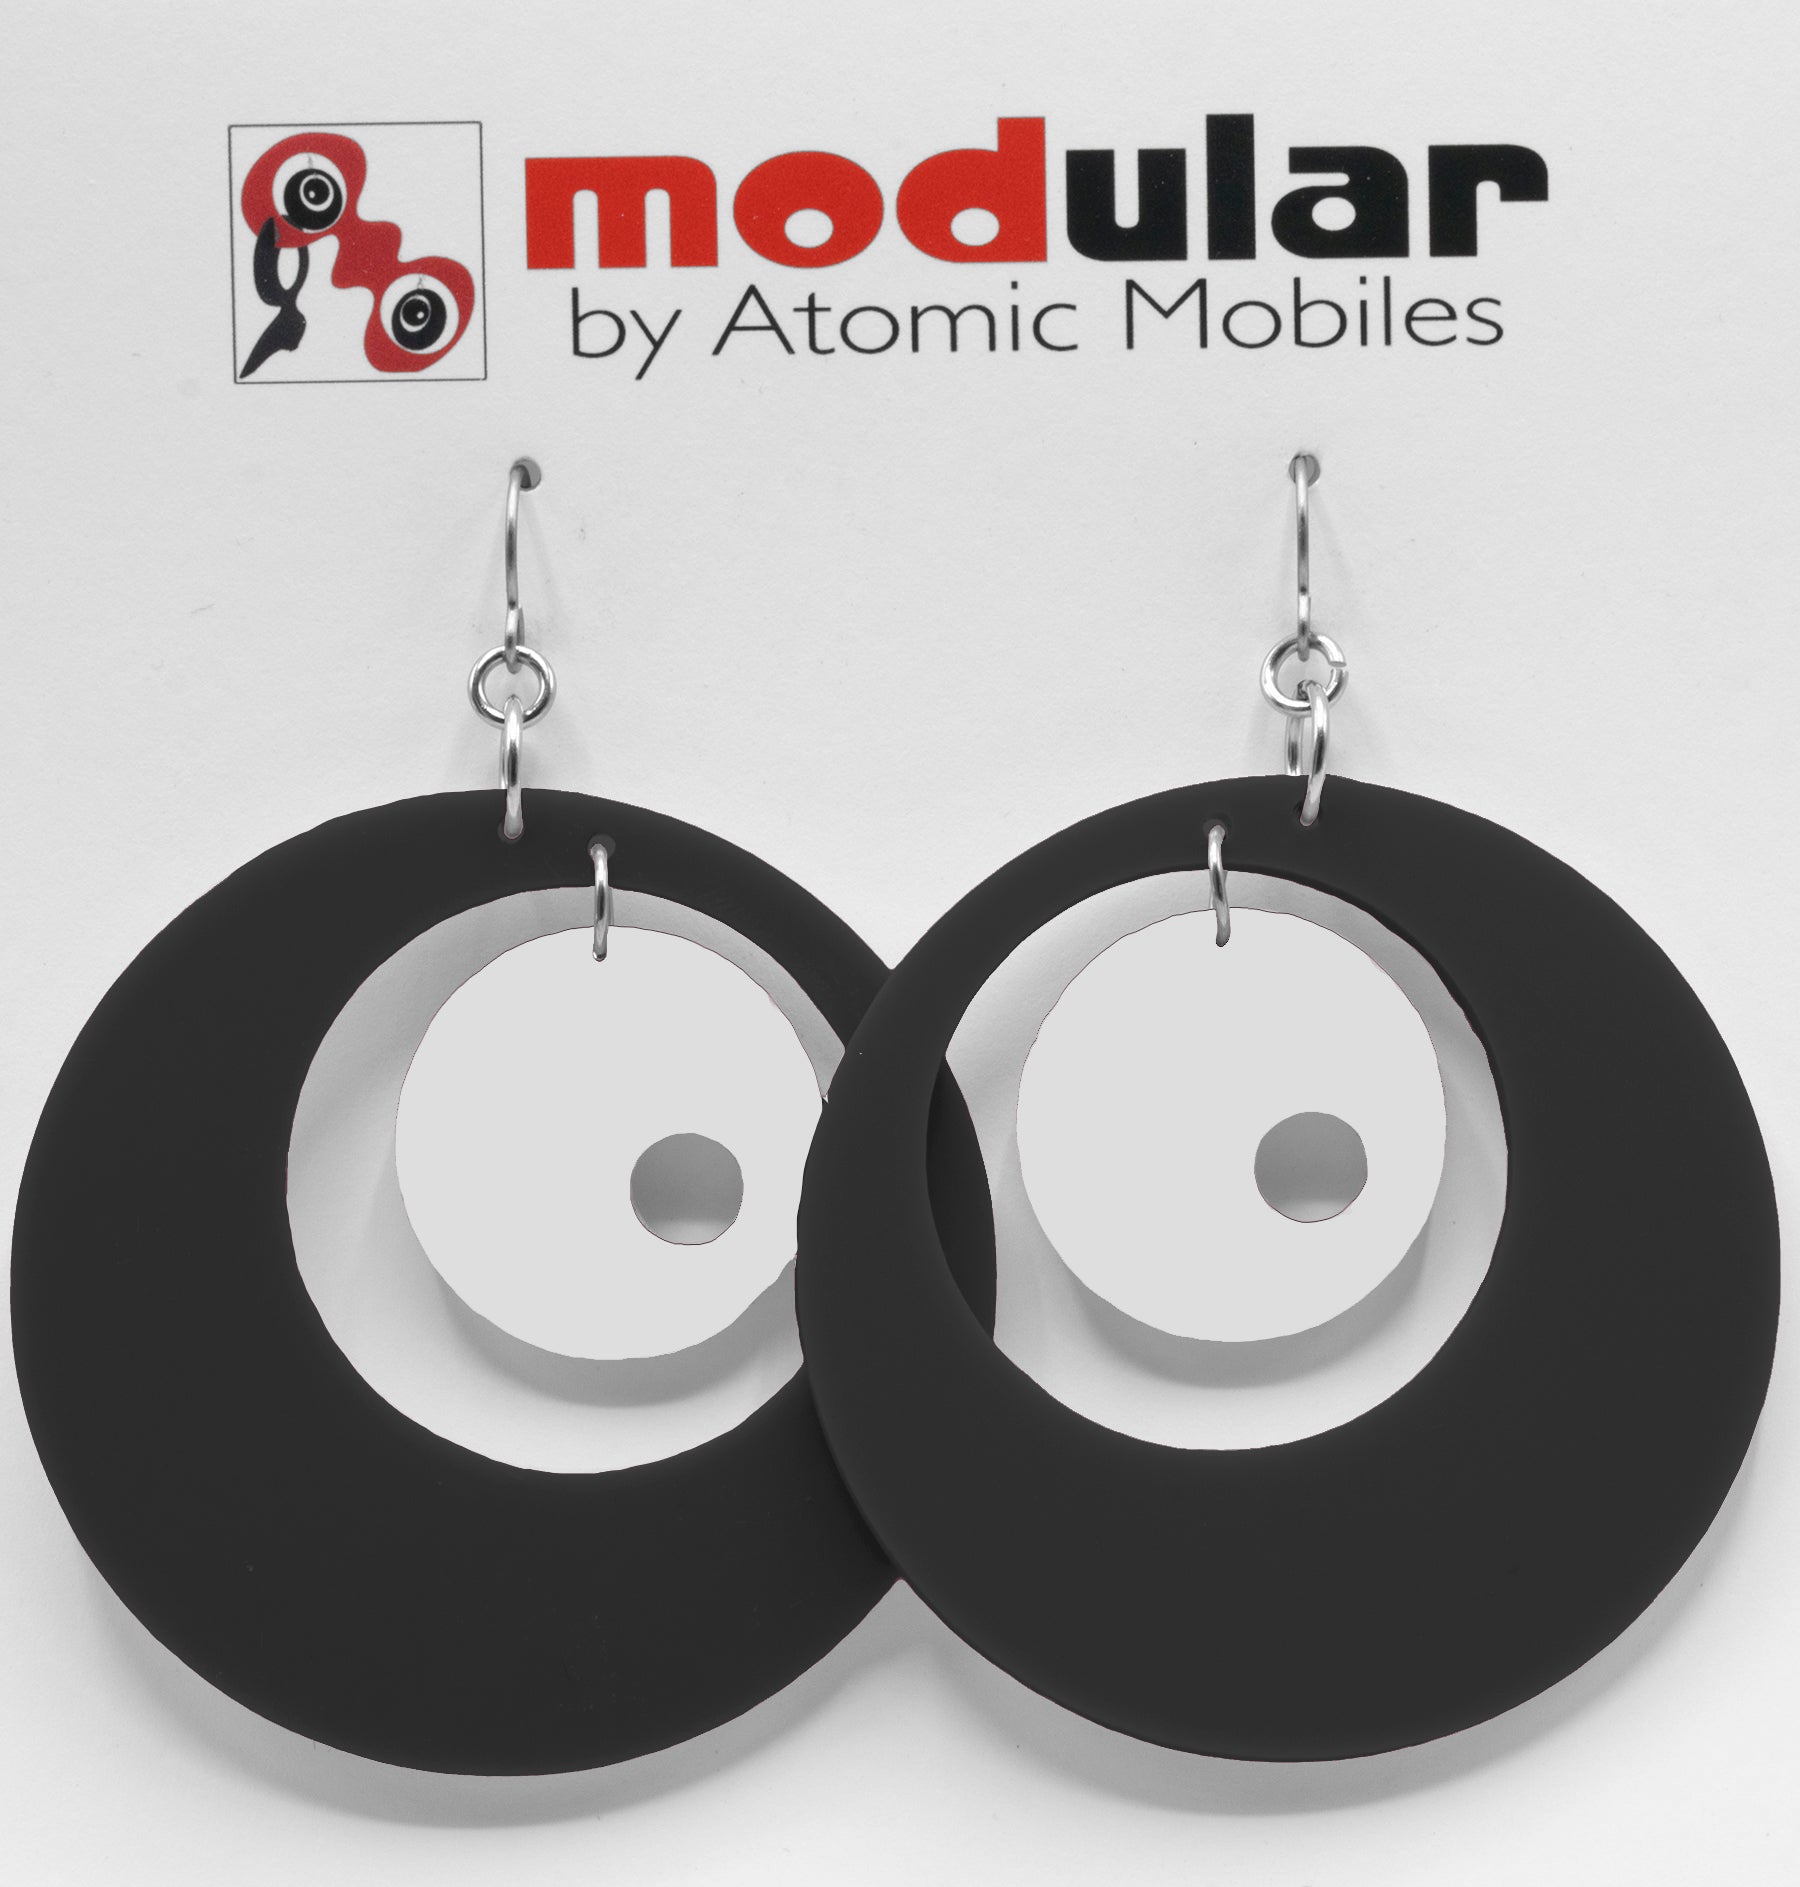 MODular Earrings - Groovy Statement Earrings in Black and White by AtomicMobiles.com - retro era inspired mod handmade jewelry